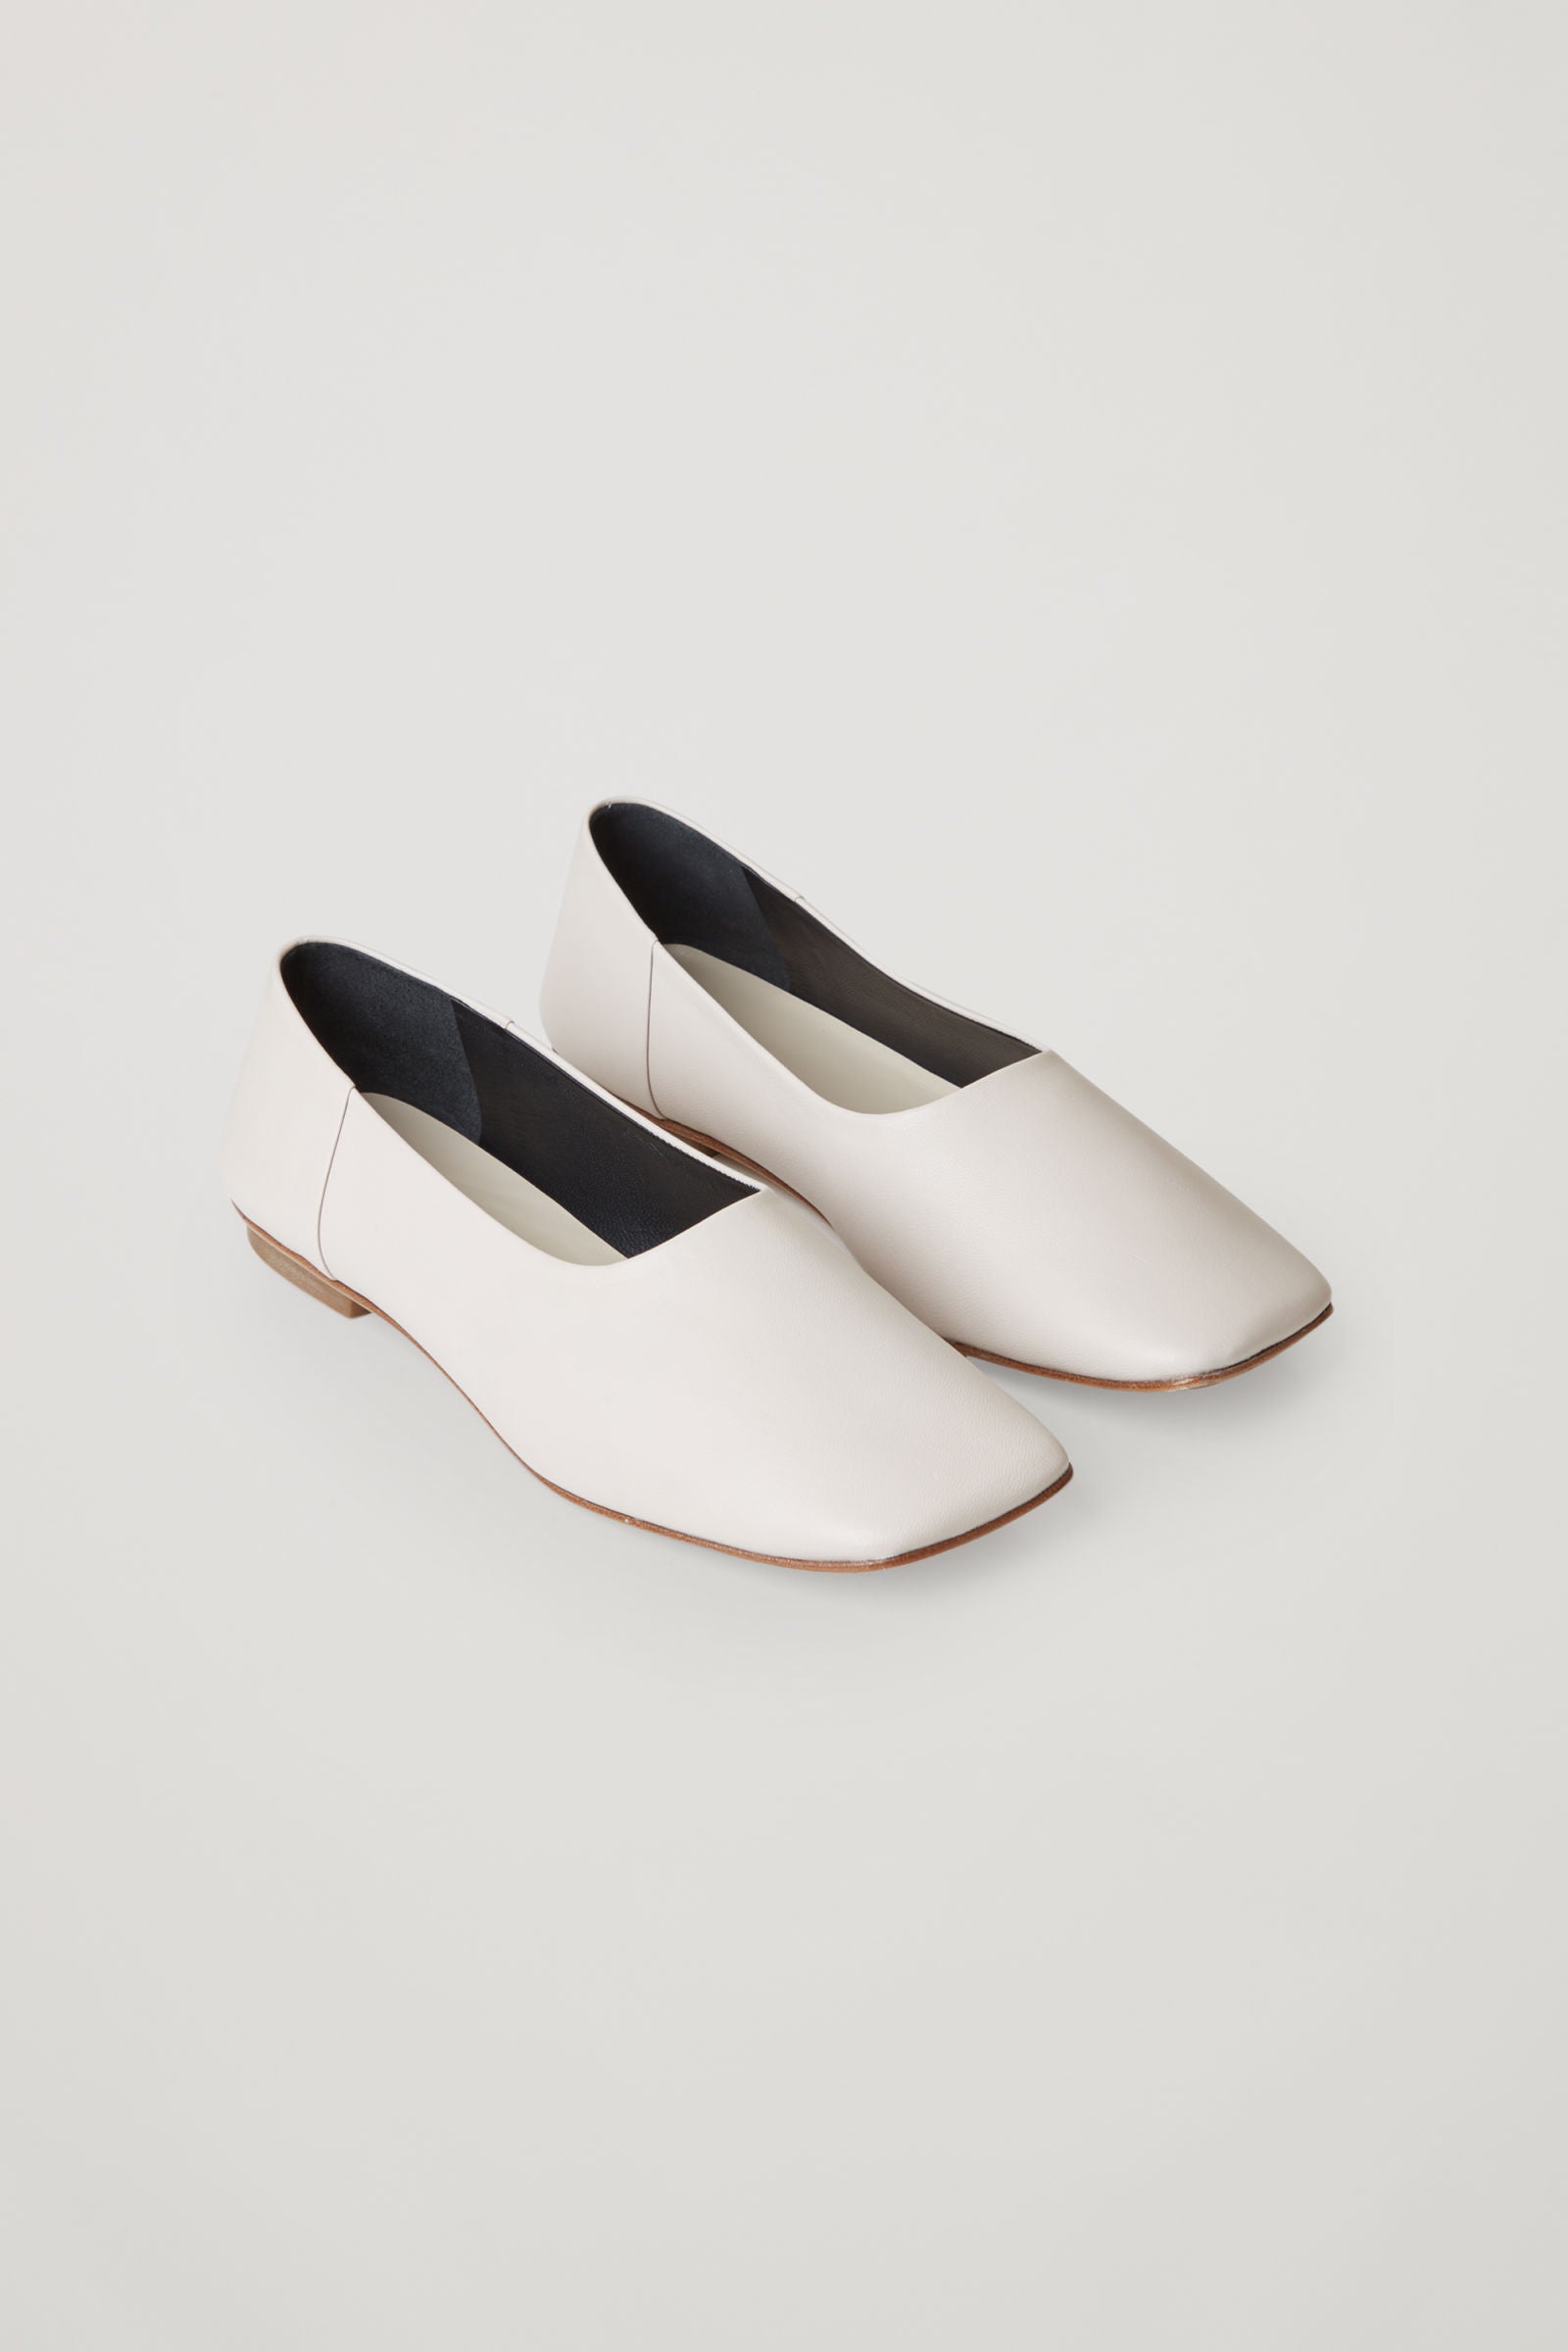 COS SQUARE TOE LEATHER BALLERINA SHOES | eclipseseal.com